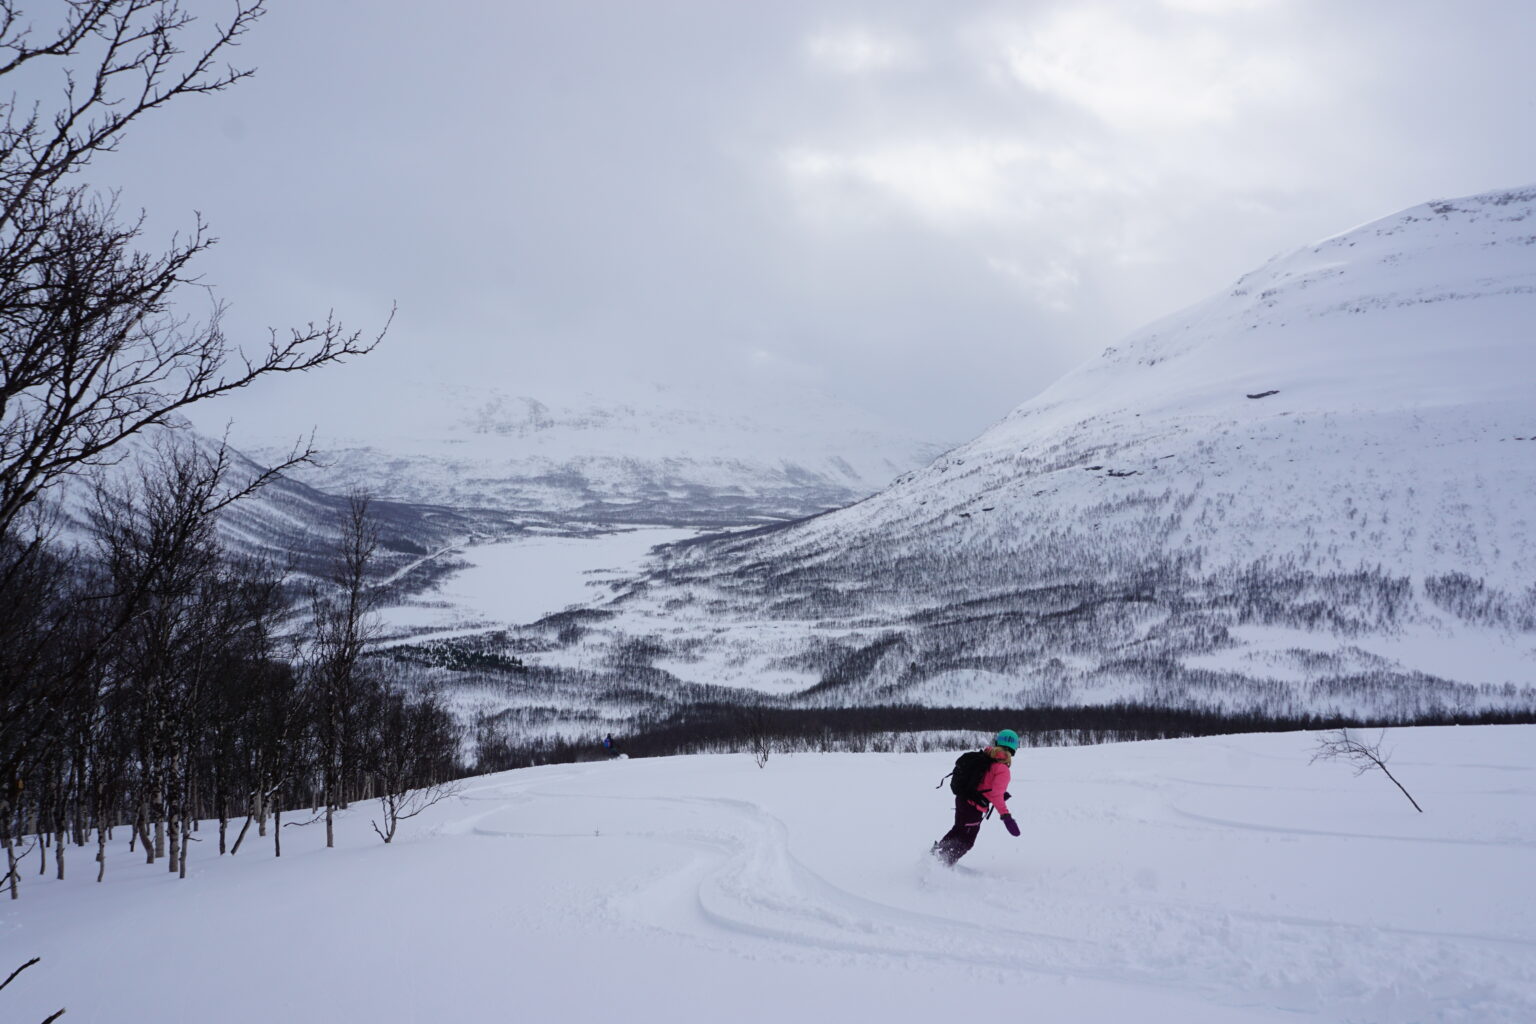 Snowboarding with the Tamokdalen Valley in the distance